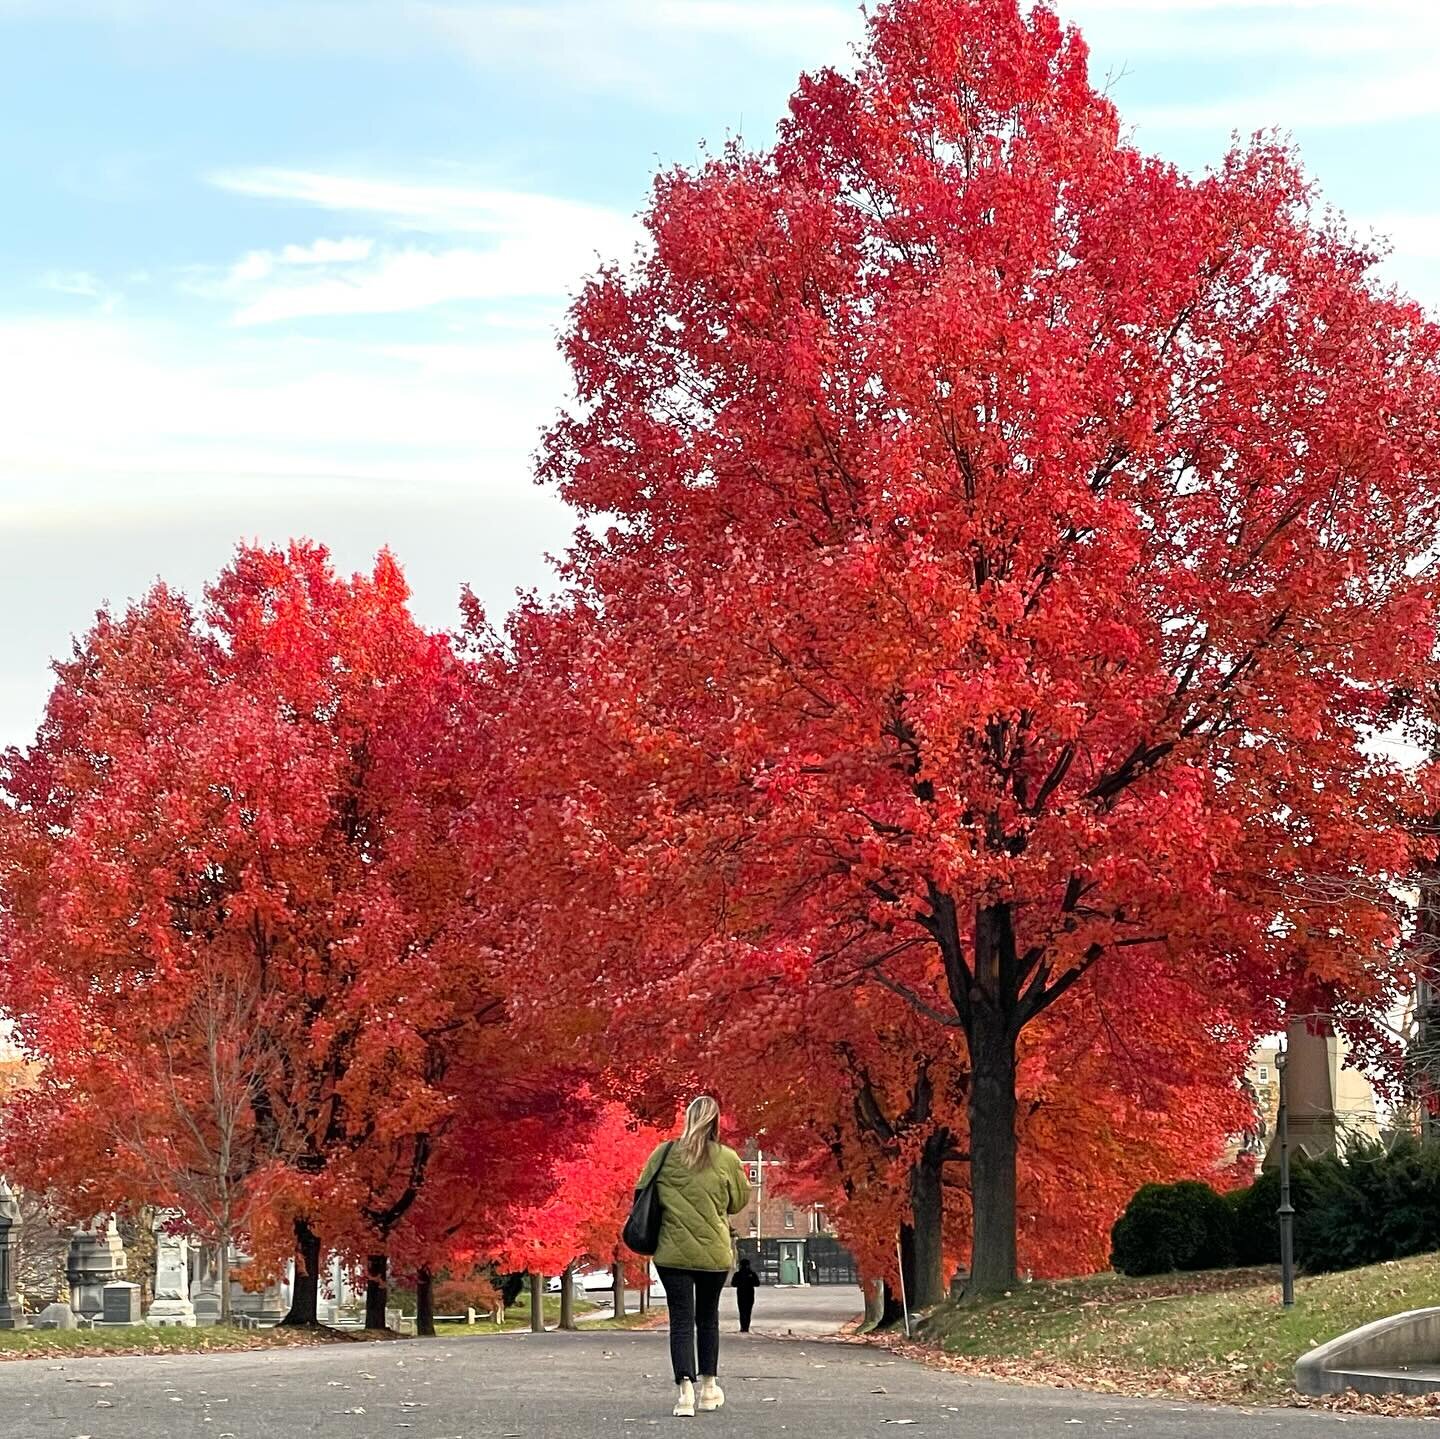 Late post of amazing fall foliage in Greenwood Cemetery a few weeks ago. The maples near the Ft. Hamilton Pkwy entrance never disappoint. #greewoodcemetery #windsorterracebrooklyn #leafpeeping